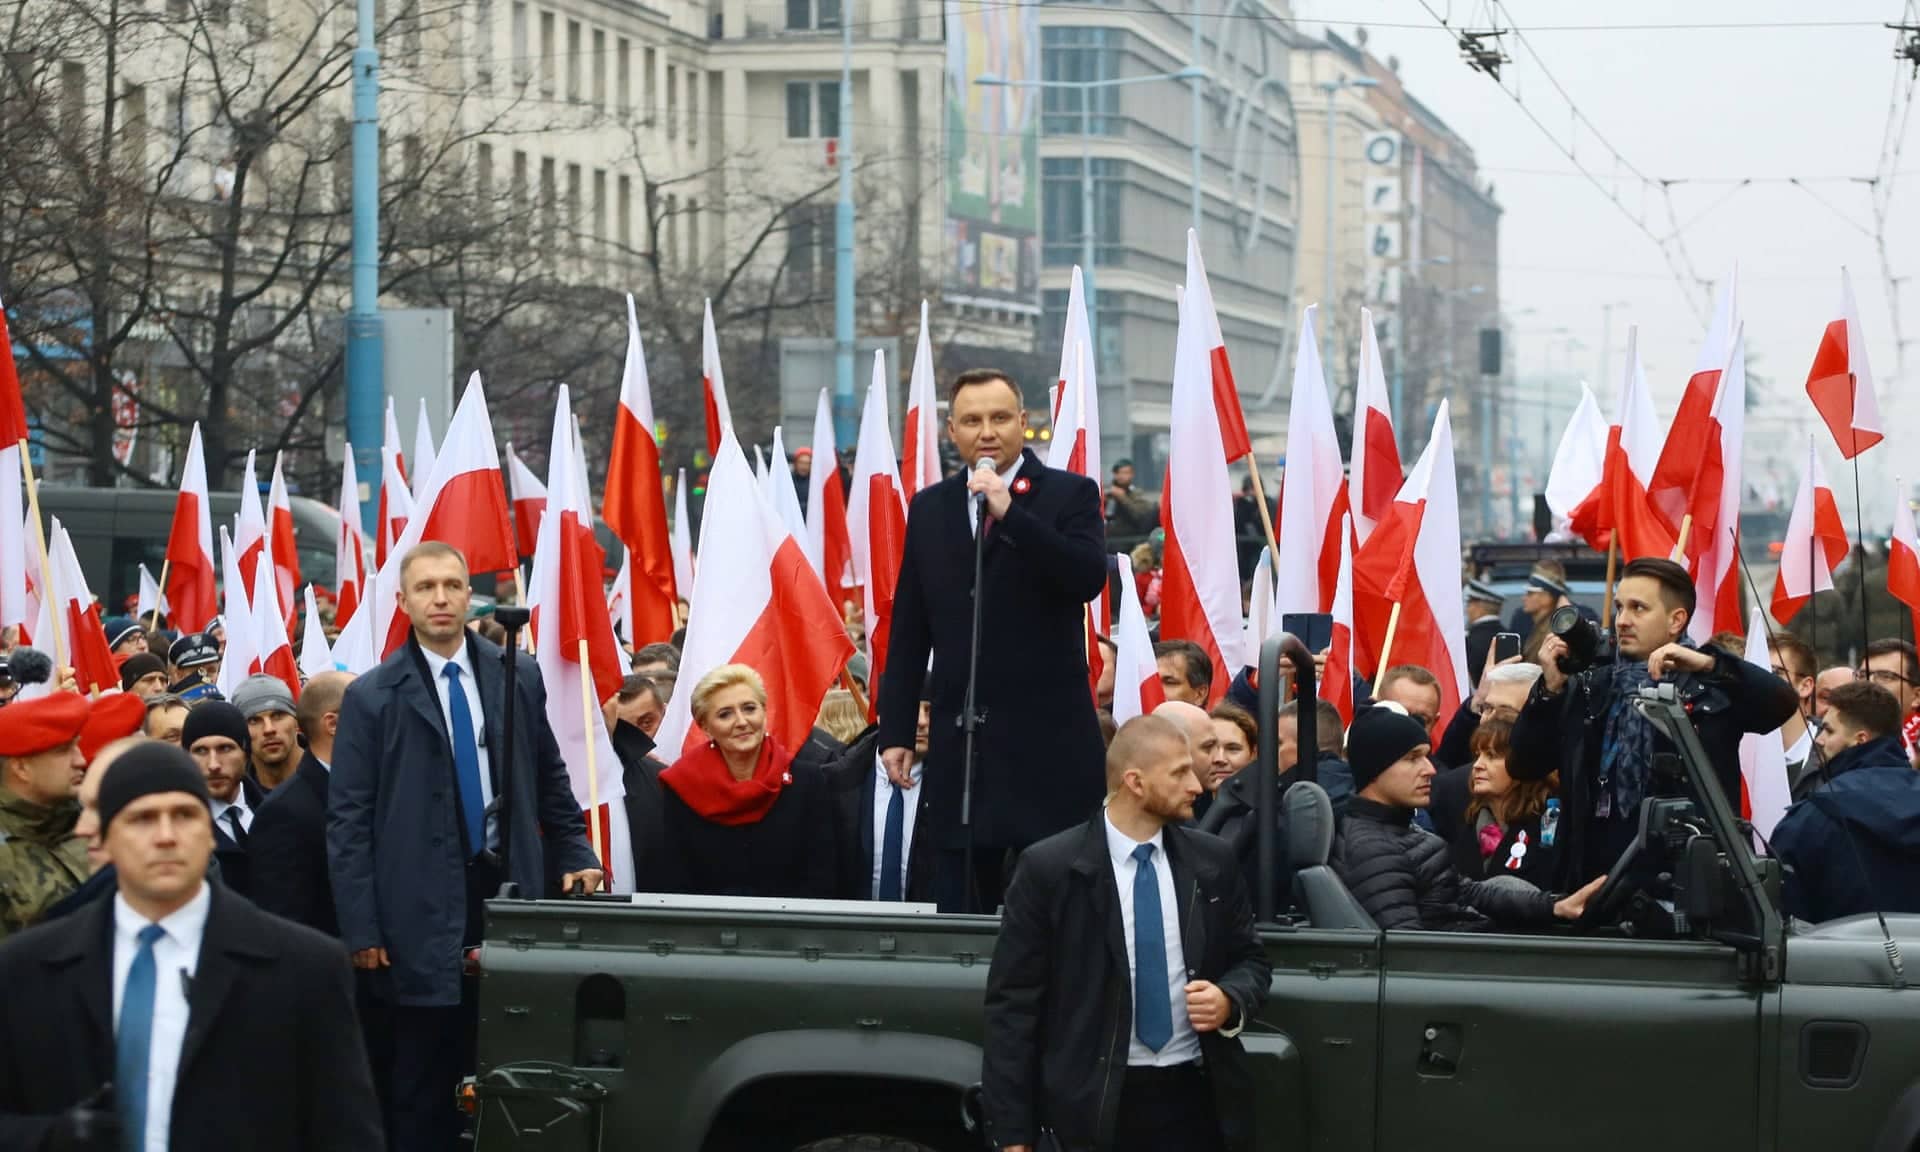 Poland’s president, Andrzej Duda, addresses the crowds before the official start of a march marking the 100th anniversary of Polish independence in Warsaw on 11 November.